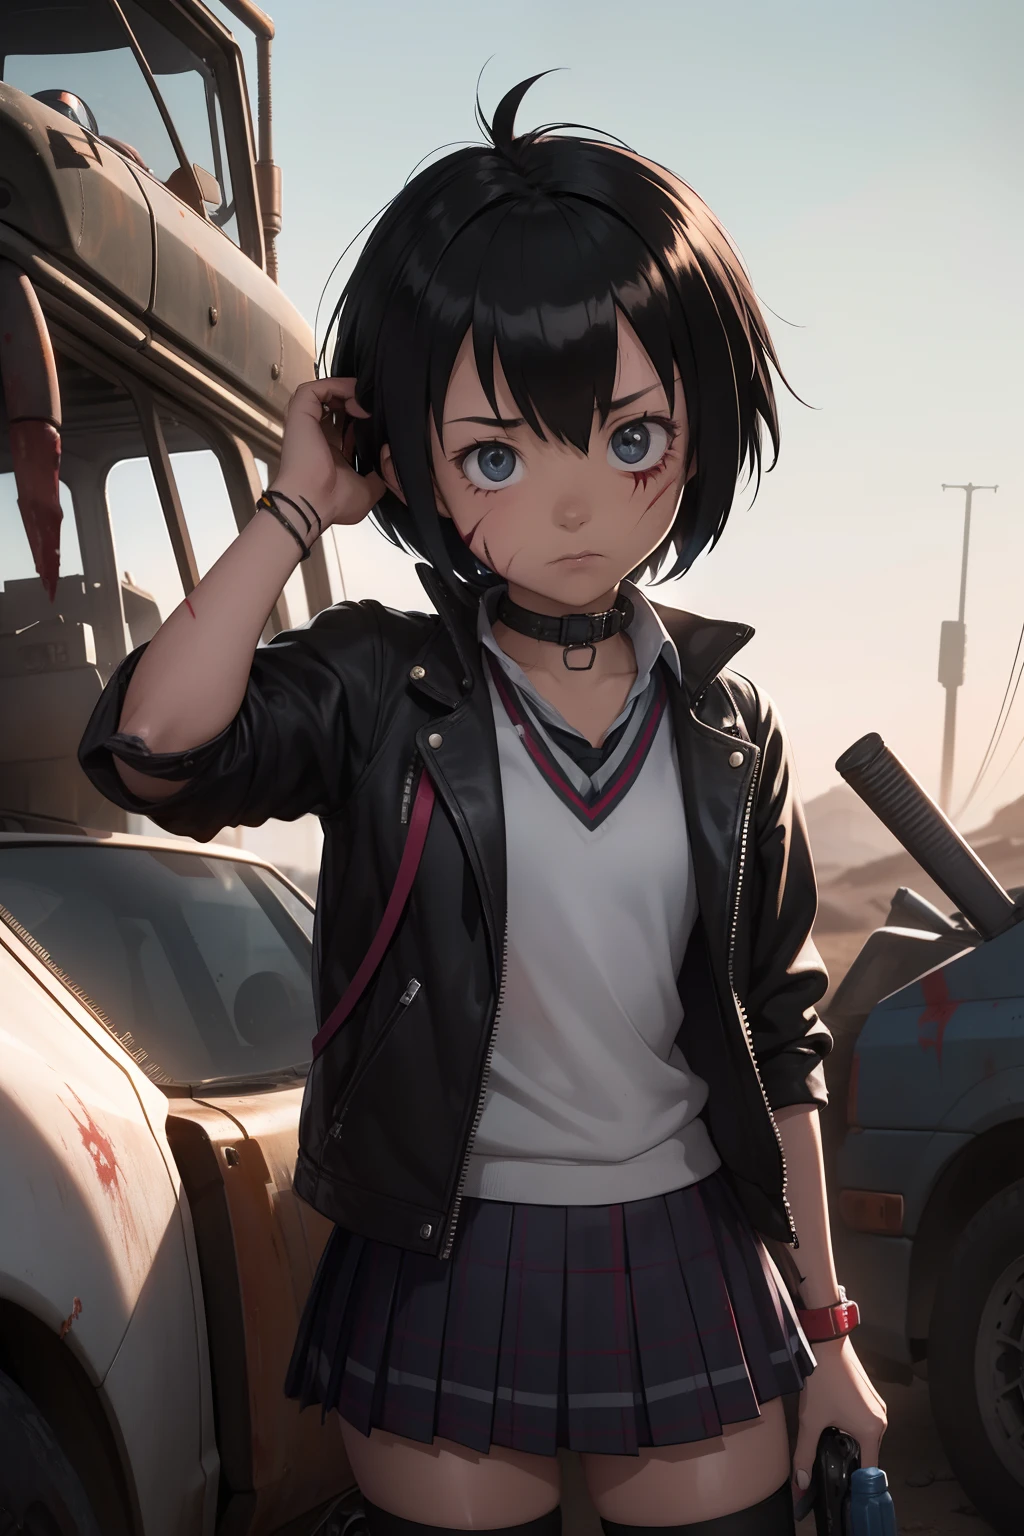 Peni Parker Post apocalyptic post apocalyptic, desert, mad max, scarred, blood on face, bruised, scars, goggles on head, goggles on head, schoolgirl uniform, leather jacket black with  outfit underneath, scars, tools, mech in back, MECH, MECH,MECH, guns on holter, tools, techy, engineer, scars, scars, scars, Peni